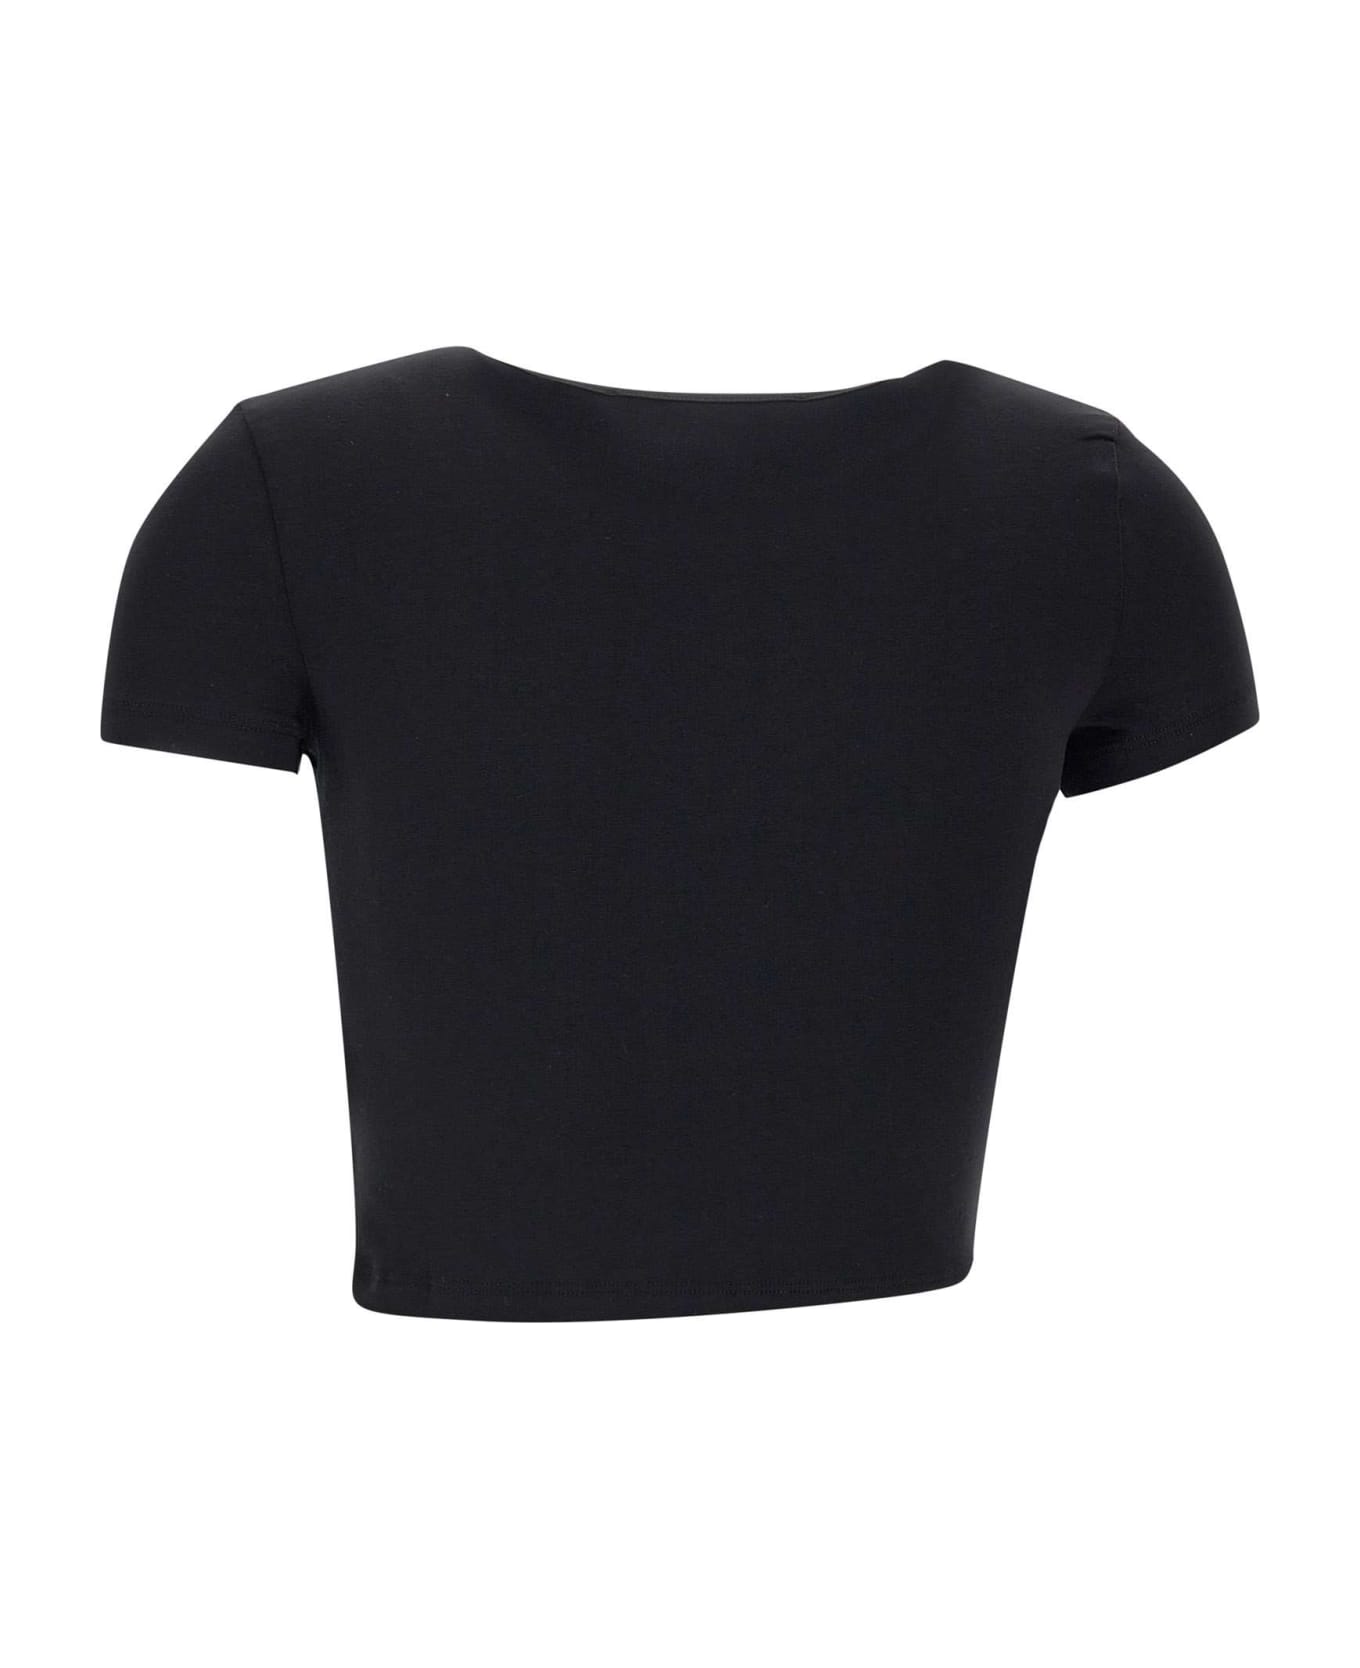 Rotate by Birger Christensen "may" Top - BLACK Tシャツ